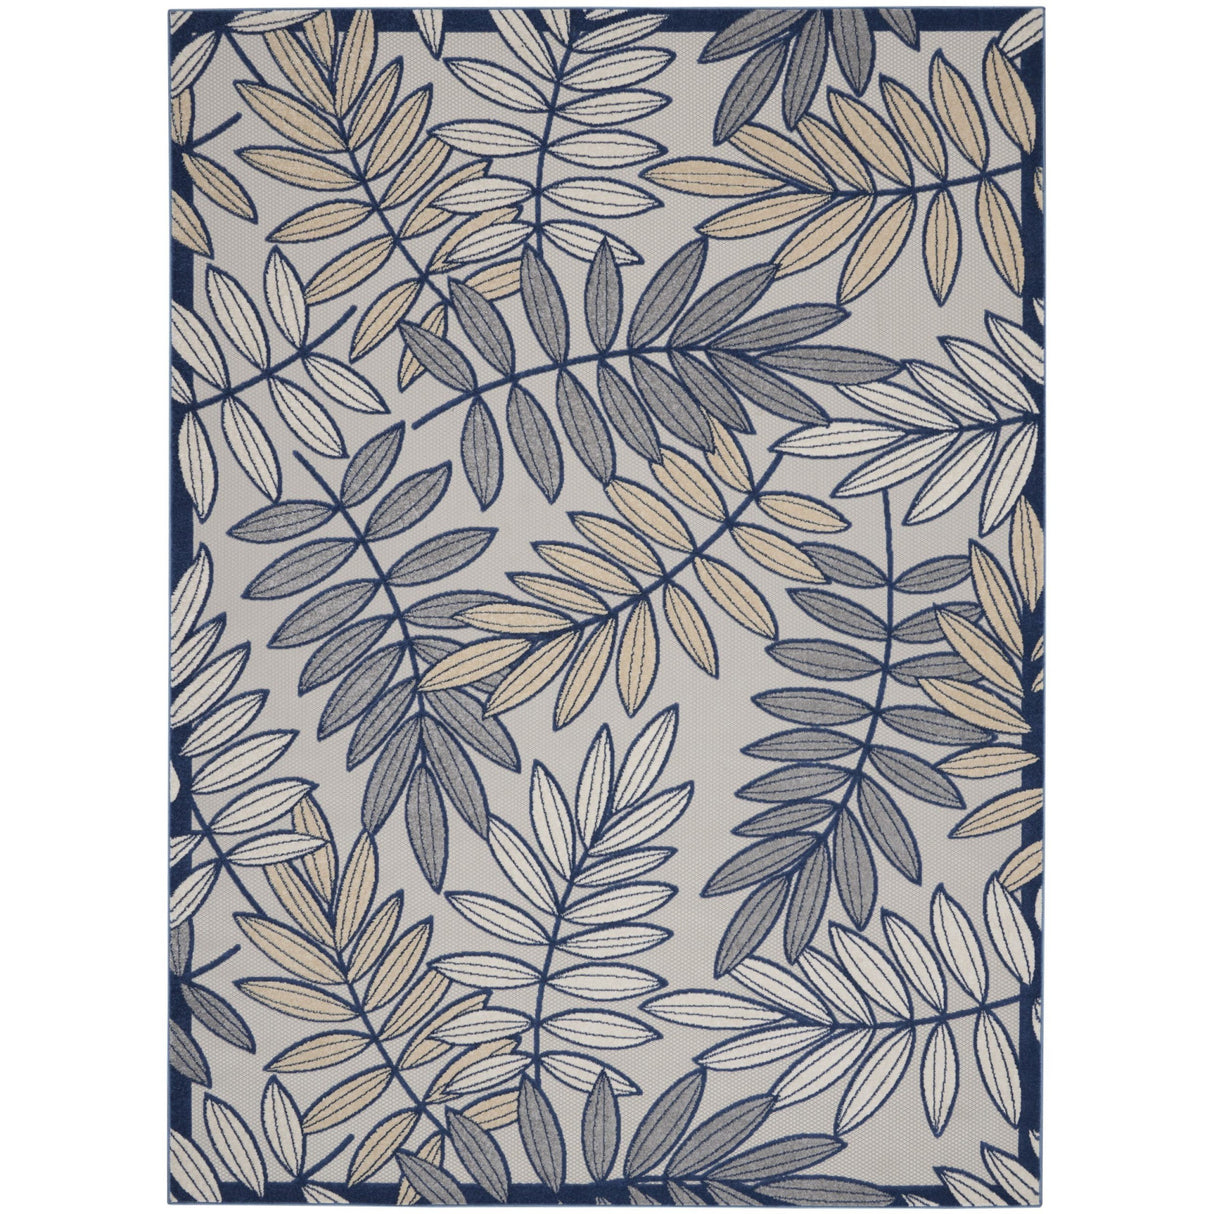 9' X 12' Ivory And Navy Floral Non Skid Indoor Outdoor Area Rug